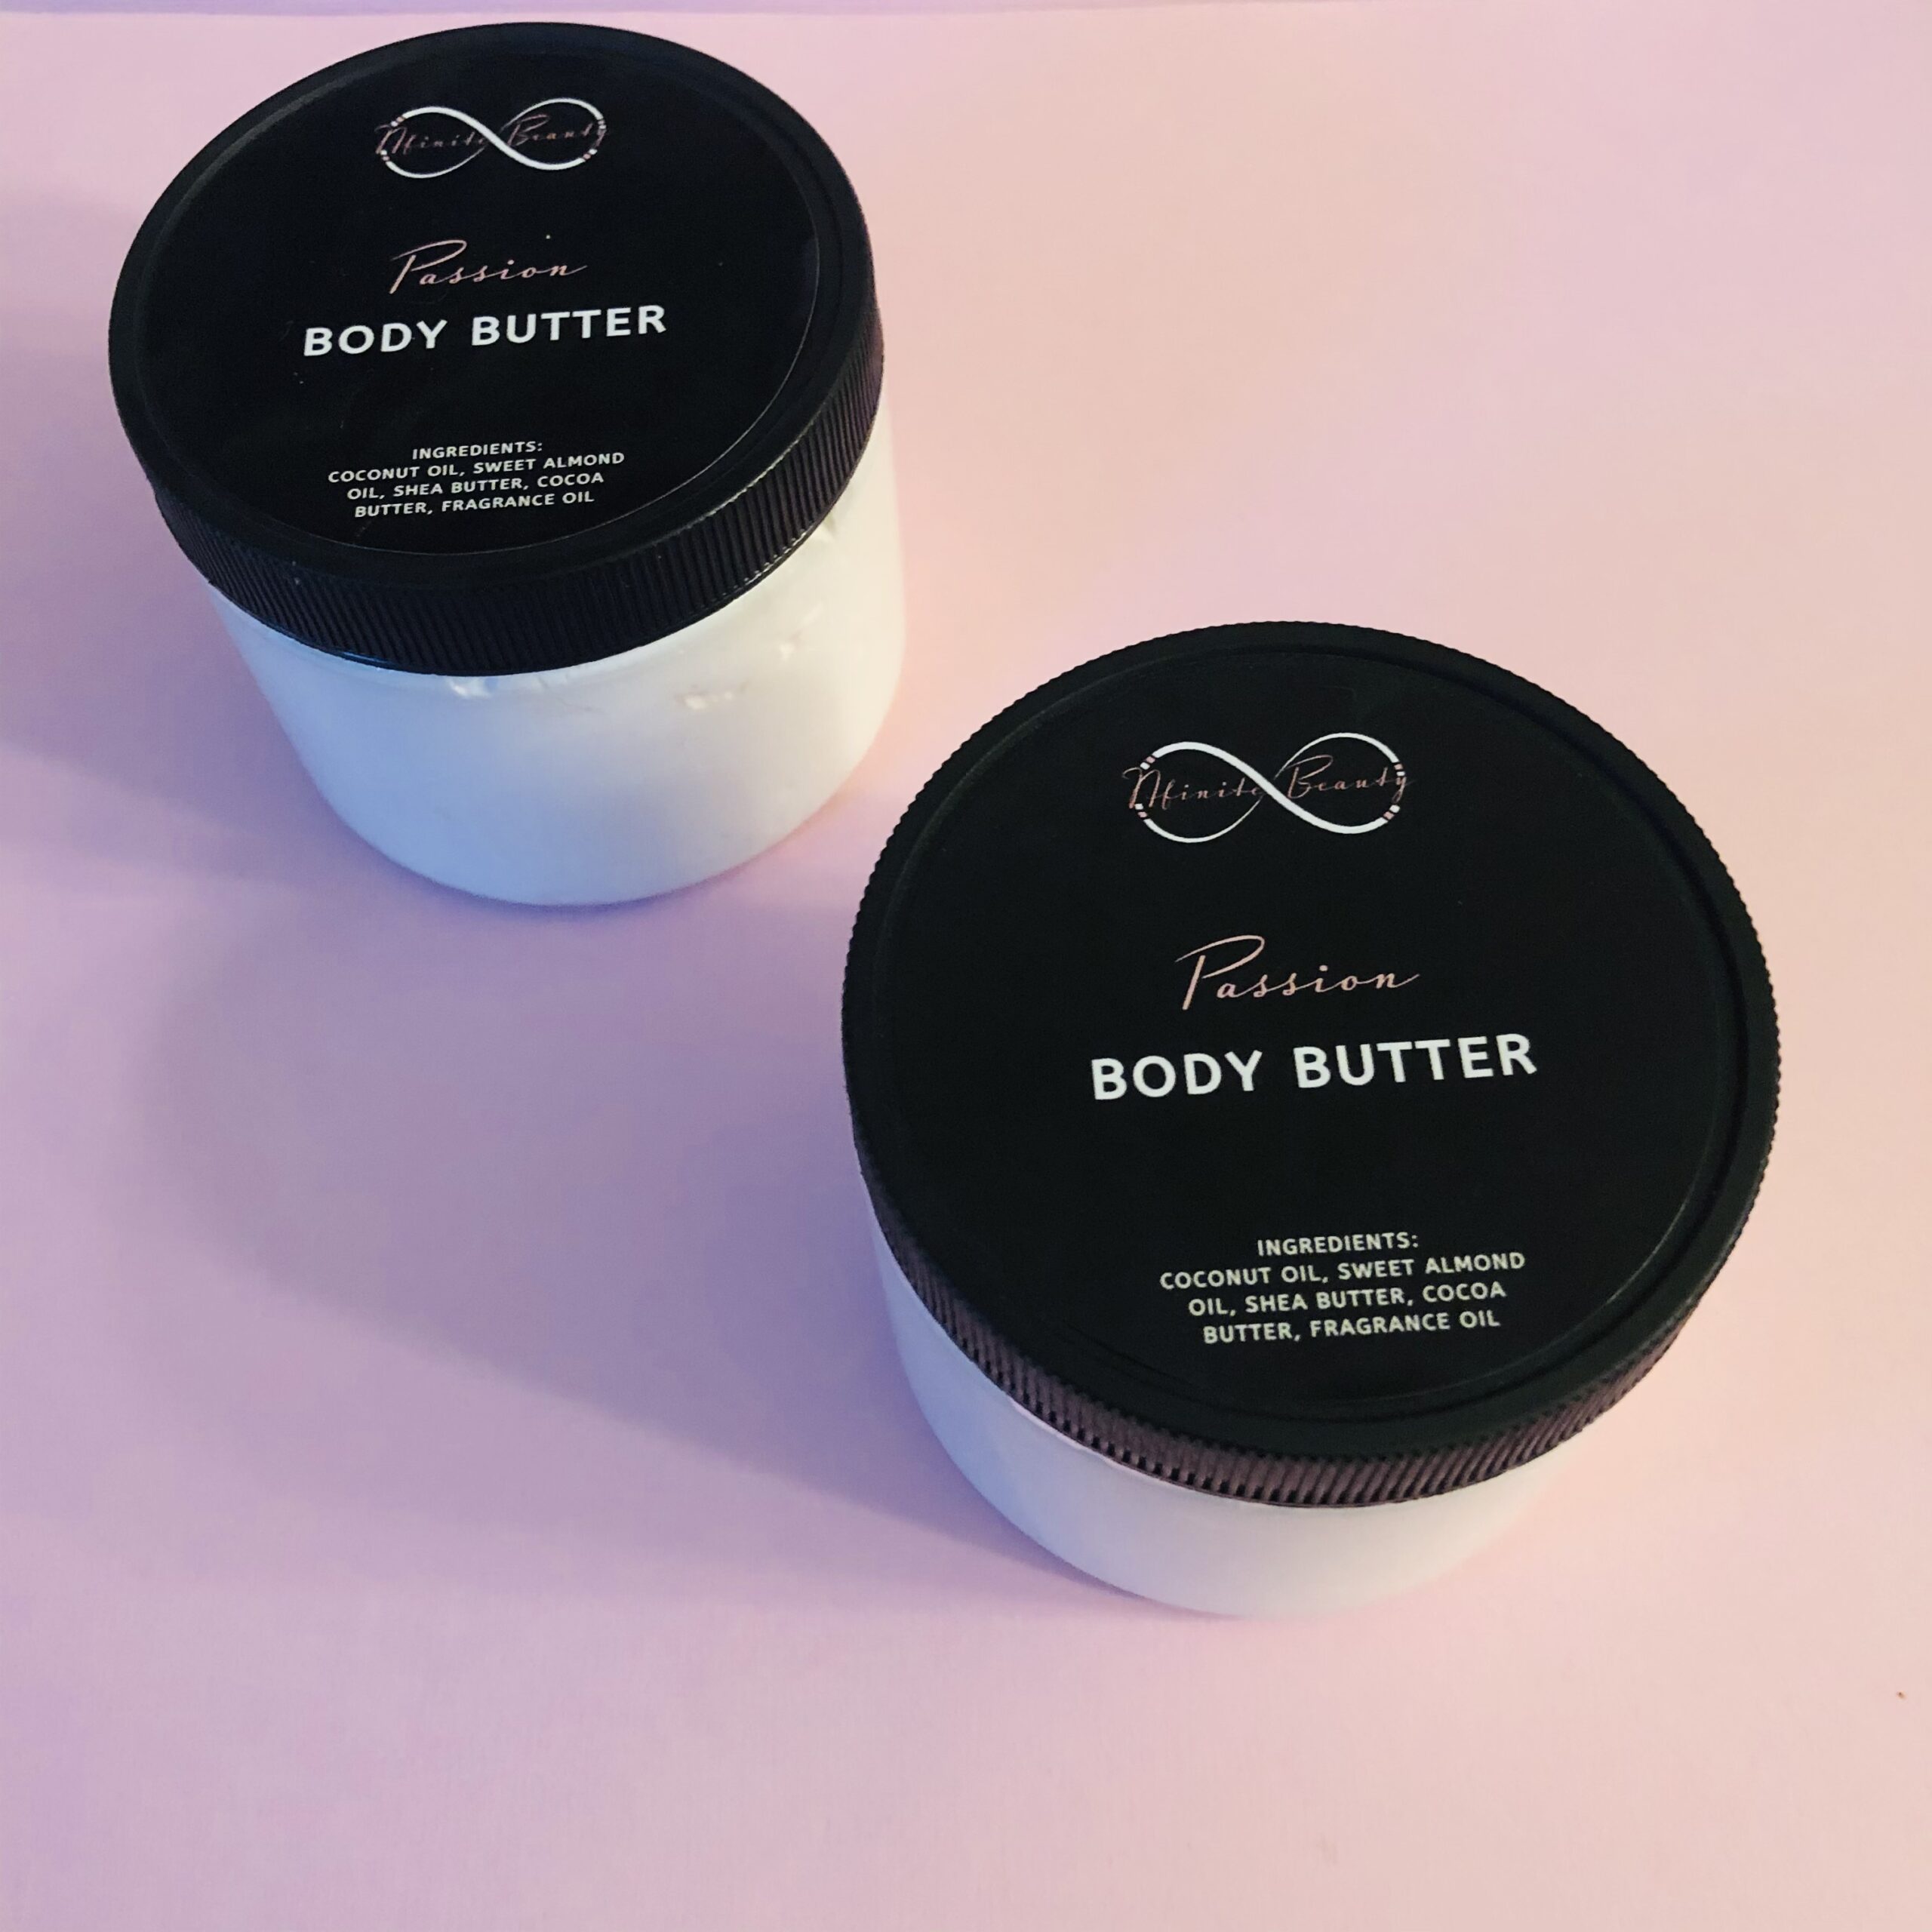 Scented body butter